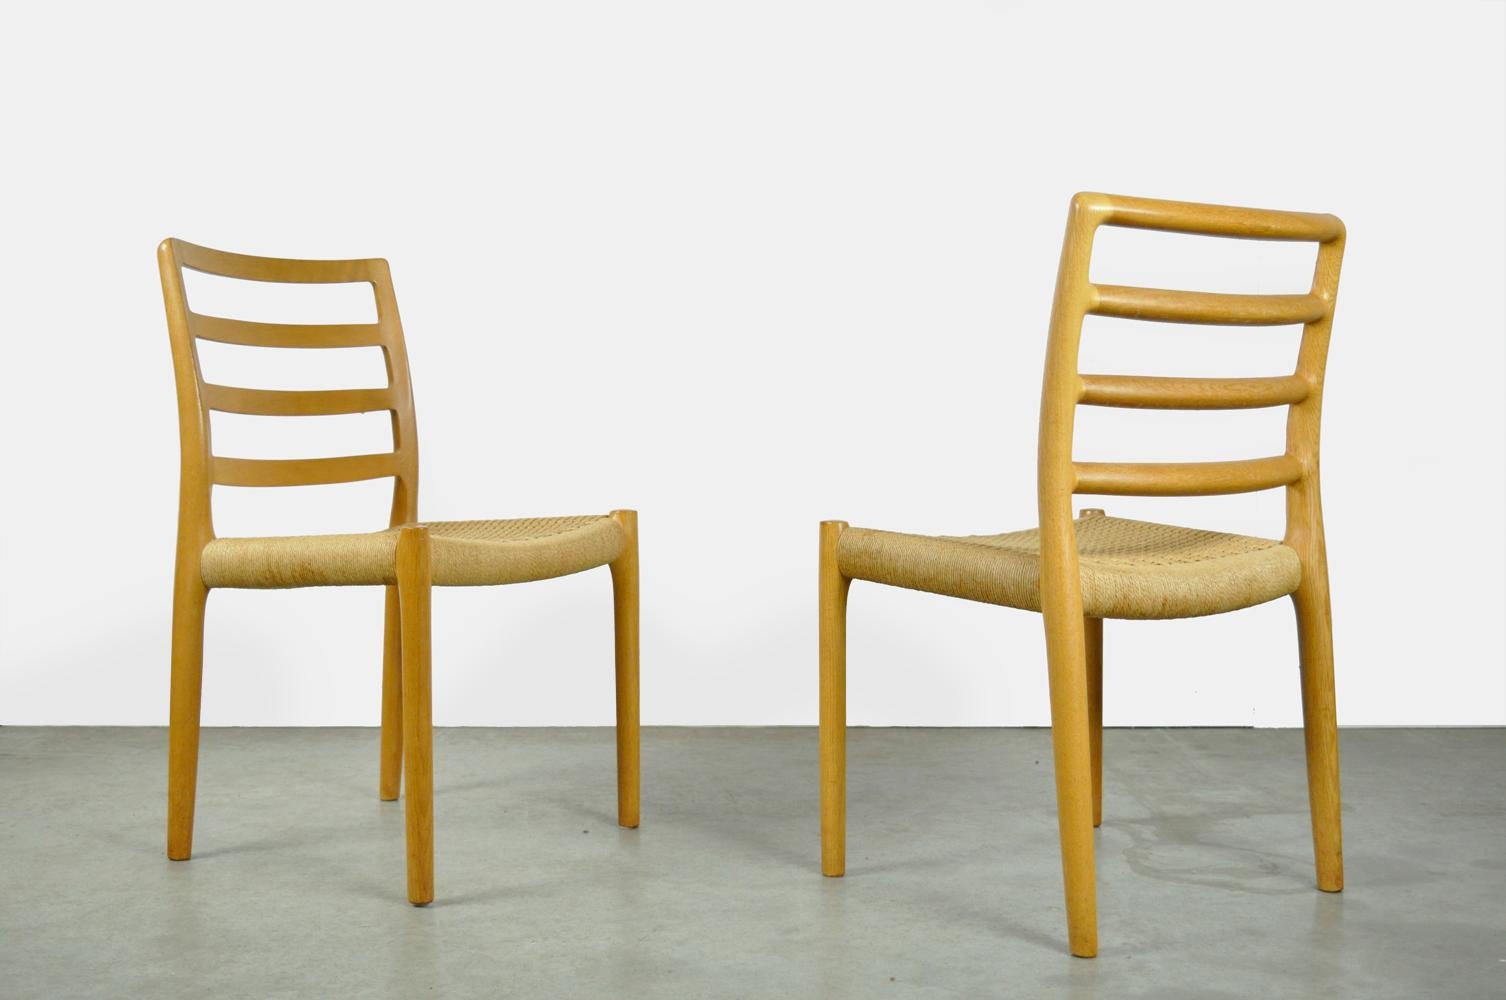 set of oak dining table chairs, model 85, designed by Niels Otto Moller and produced in Denmark by J.L. Mollers Mobelfabrik, 1970s. The frame of the elegant chairs is made of solid oak. The seat is stretched with rope (paper cord). The chairs are